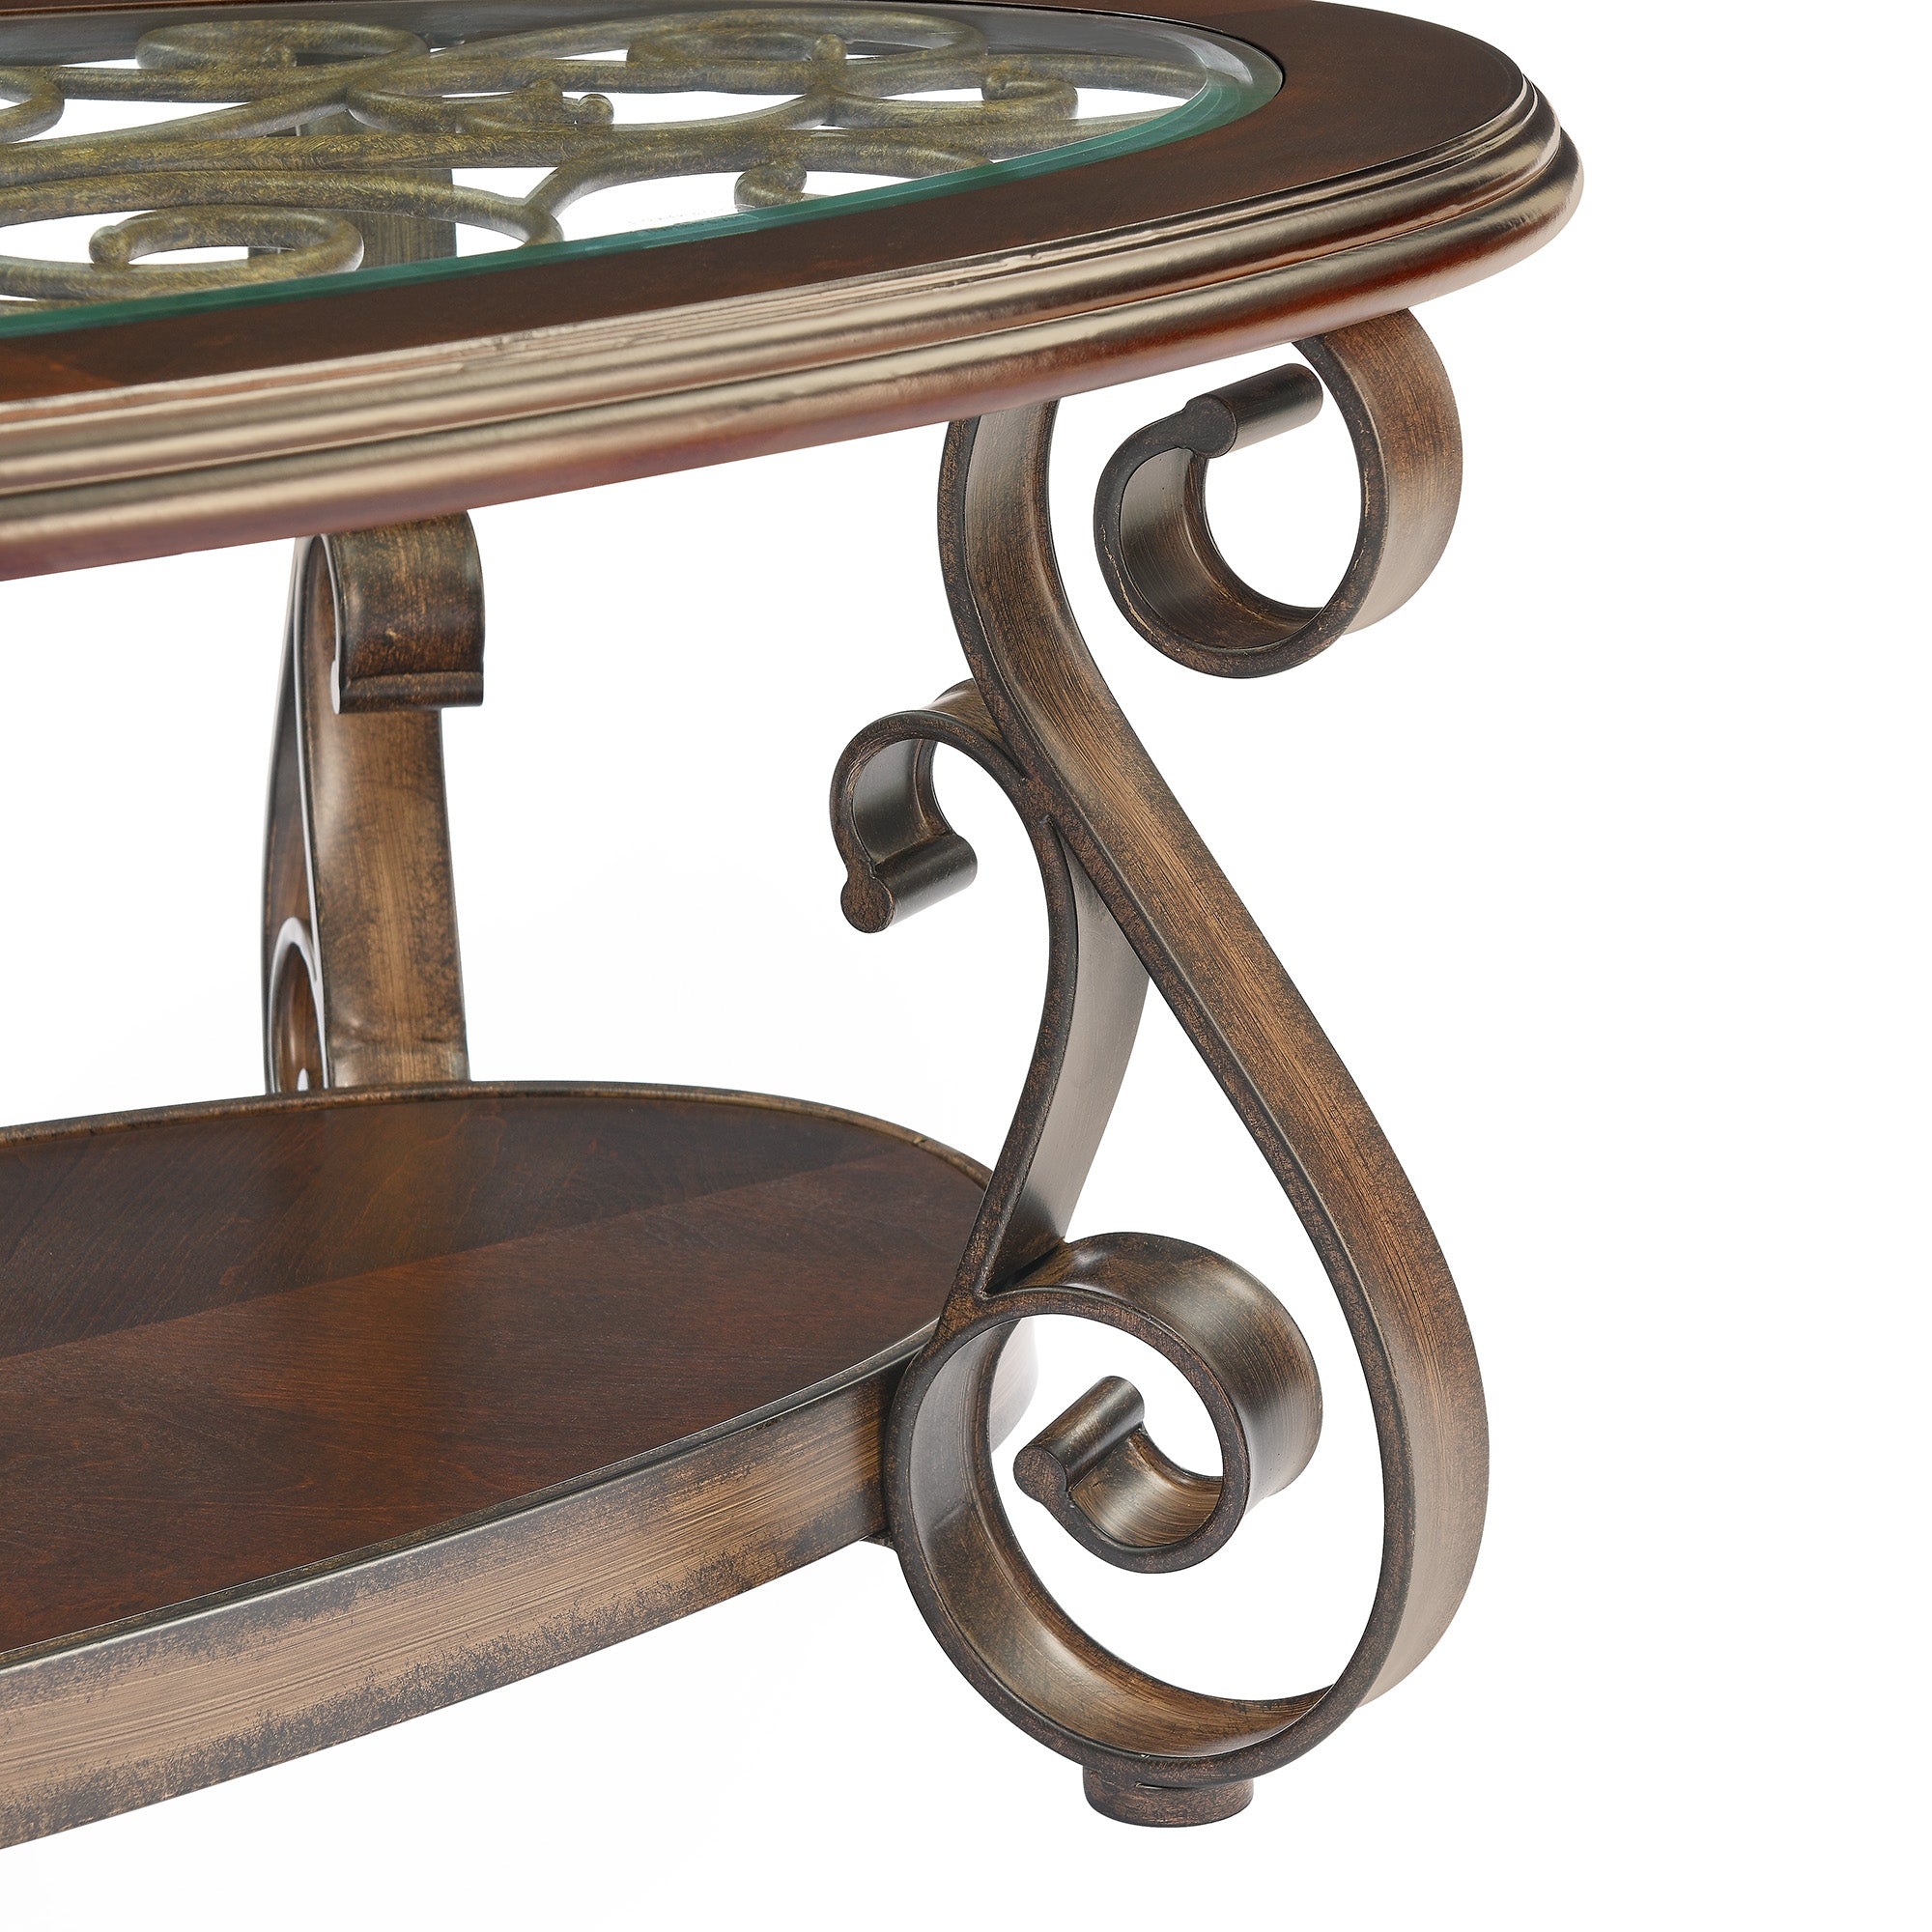 ZNTS Coffee Table with Glass Table Top and Powder Coat Finish Metal LegsDark Brown 52.5"X28.5"X19.5") W48742160